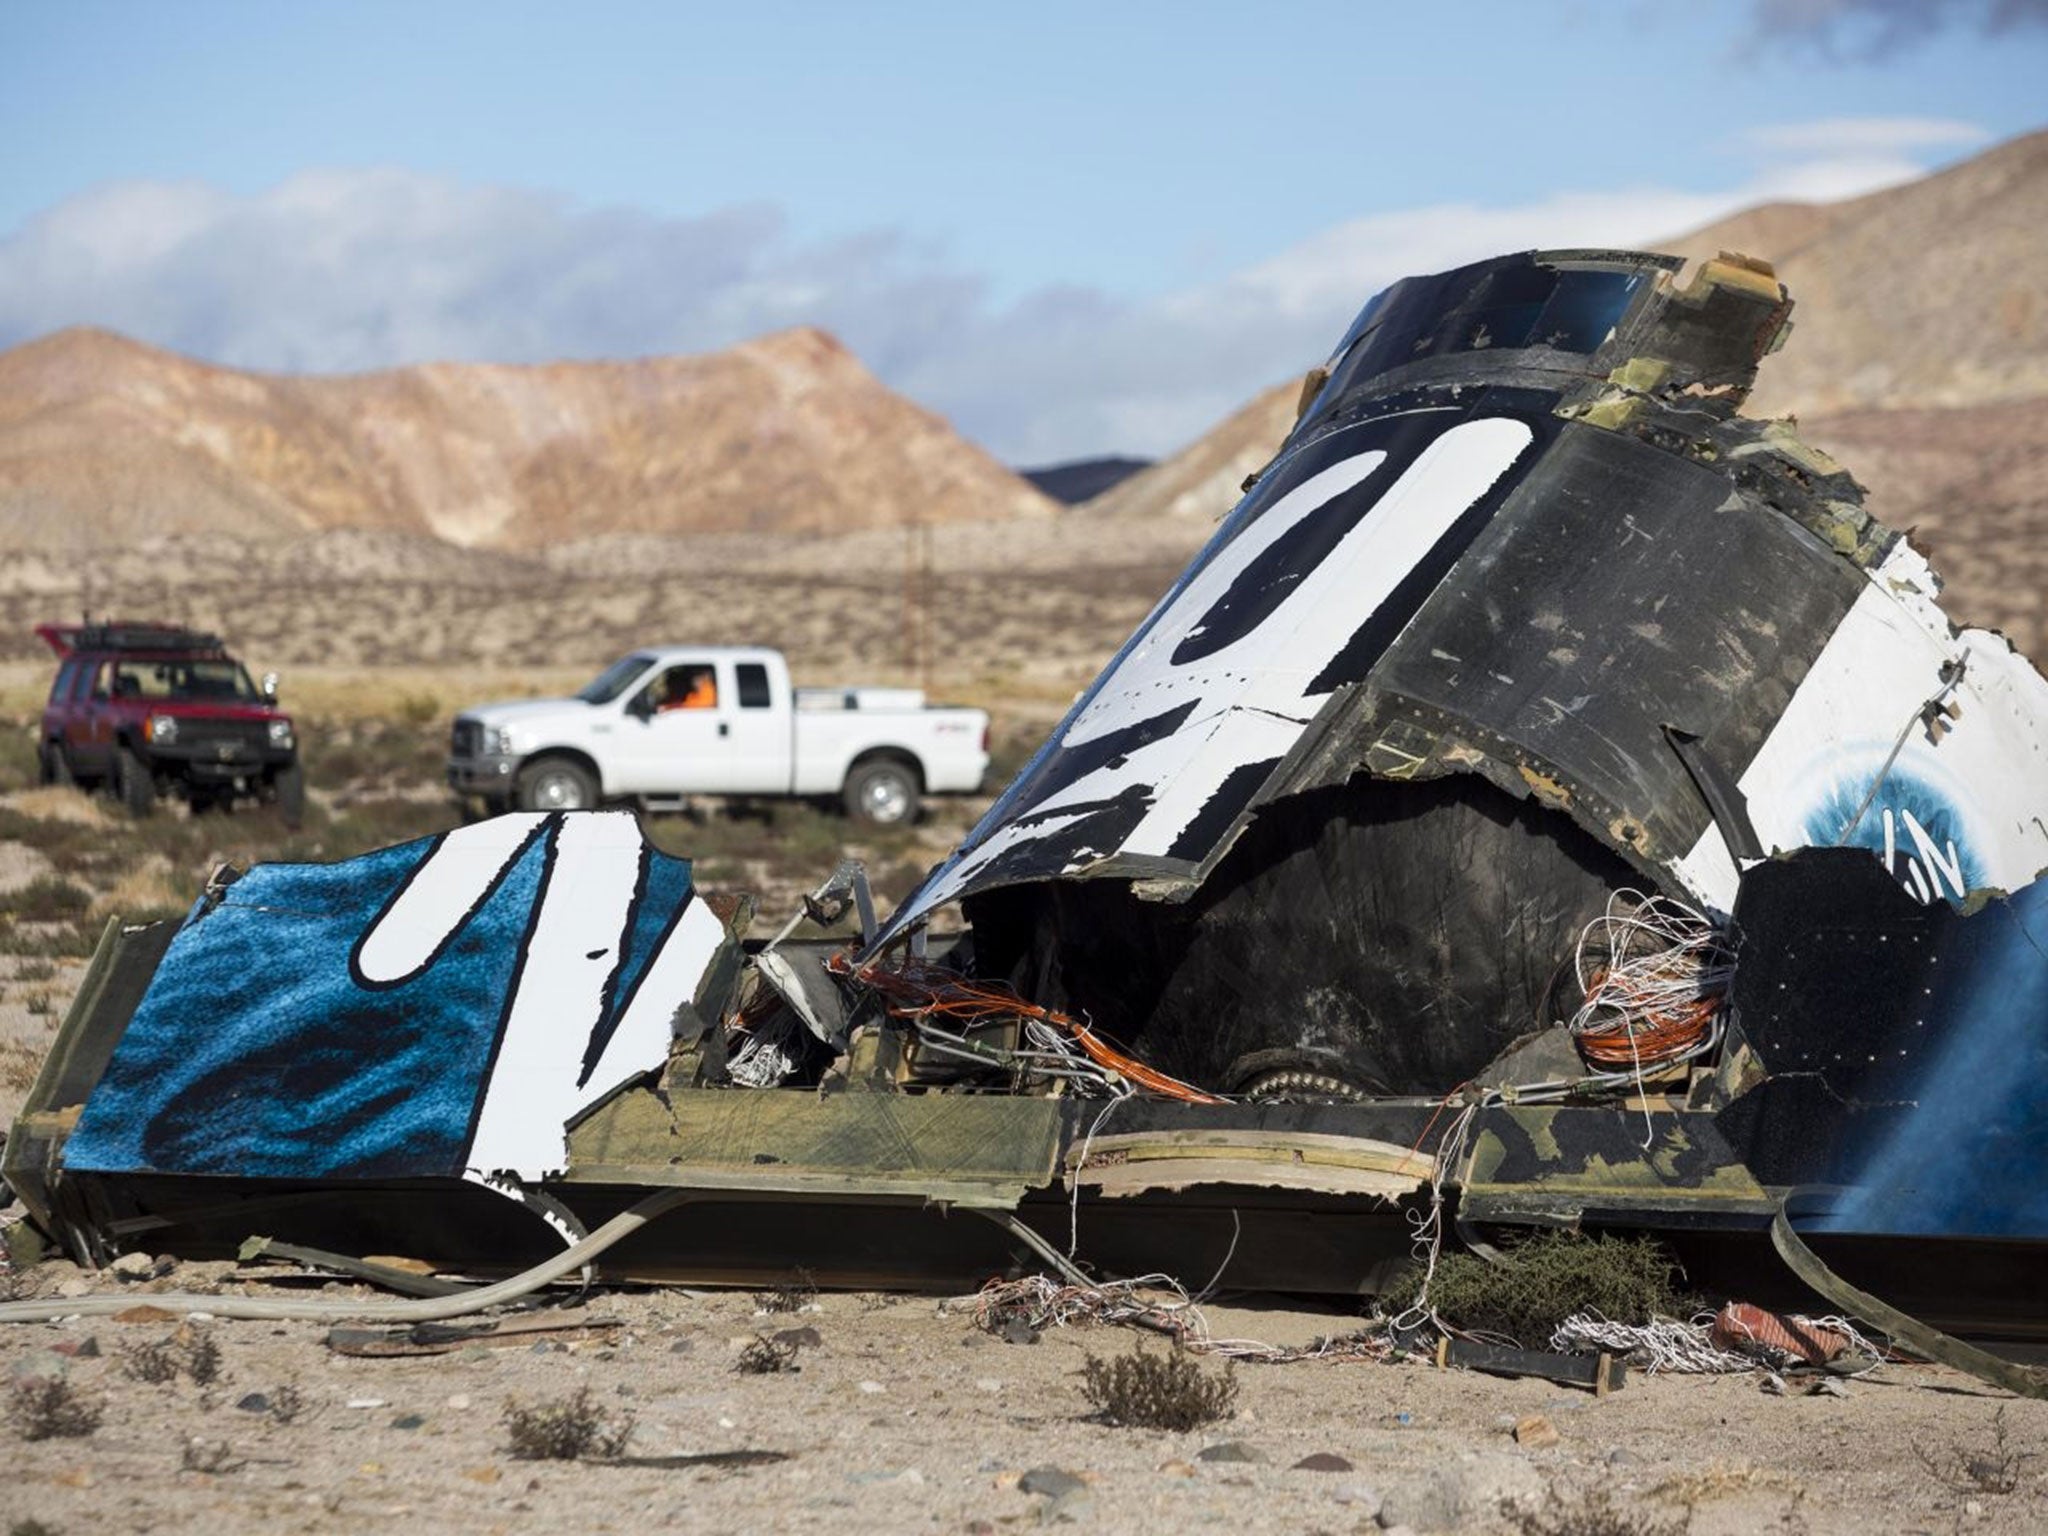 The Virgin Galactic space tourism rocket crashed in Mojave, California, last year